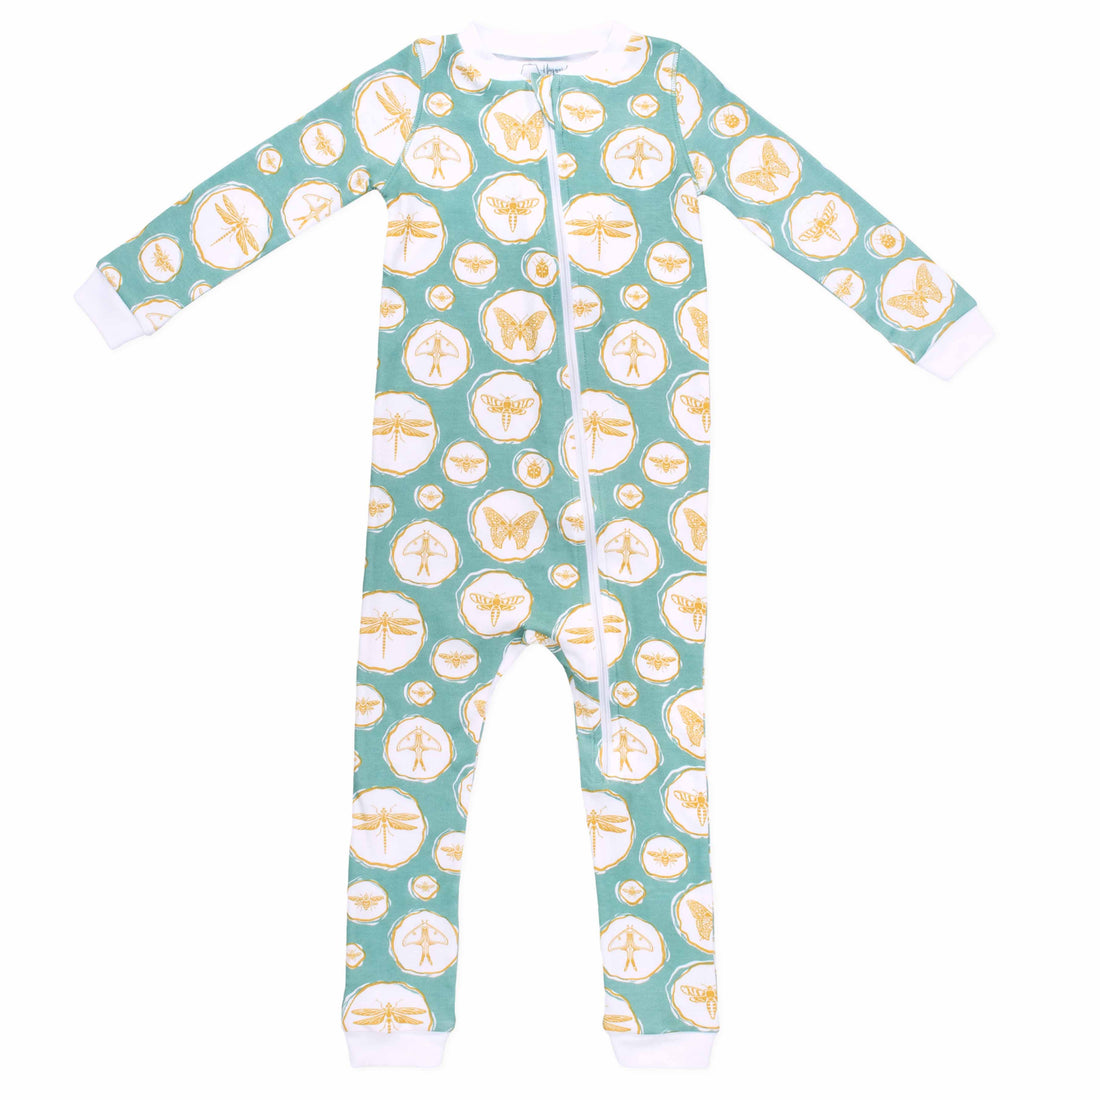 Sea green zippered pajama with bug and insect pattern made in pima cotton